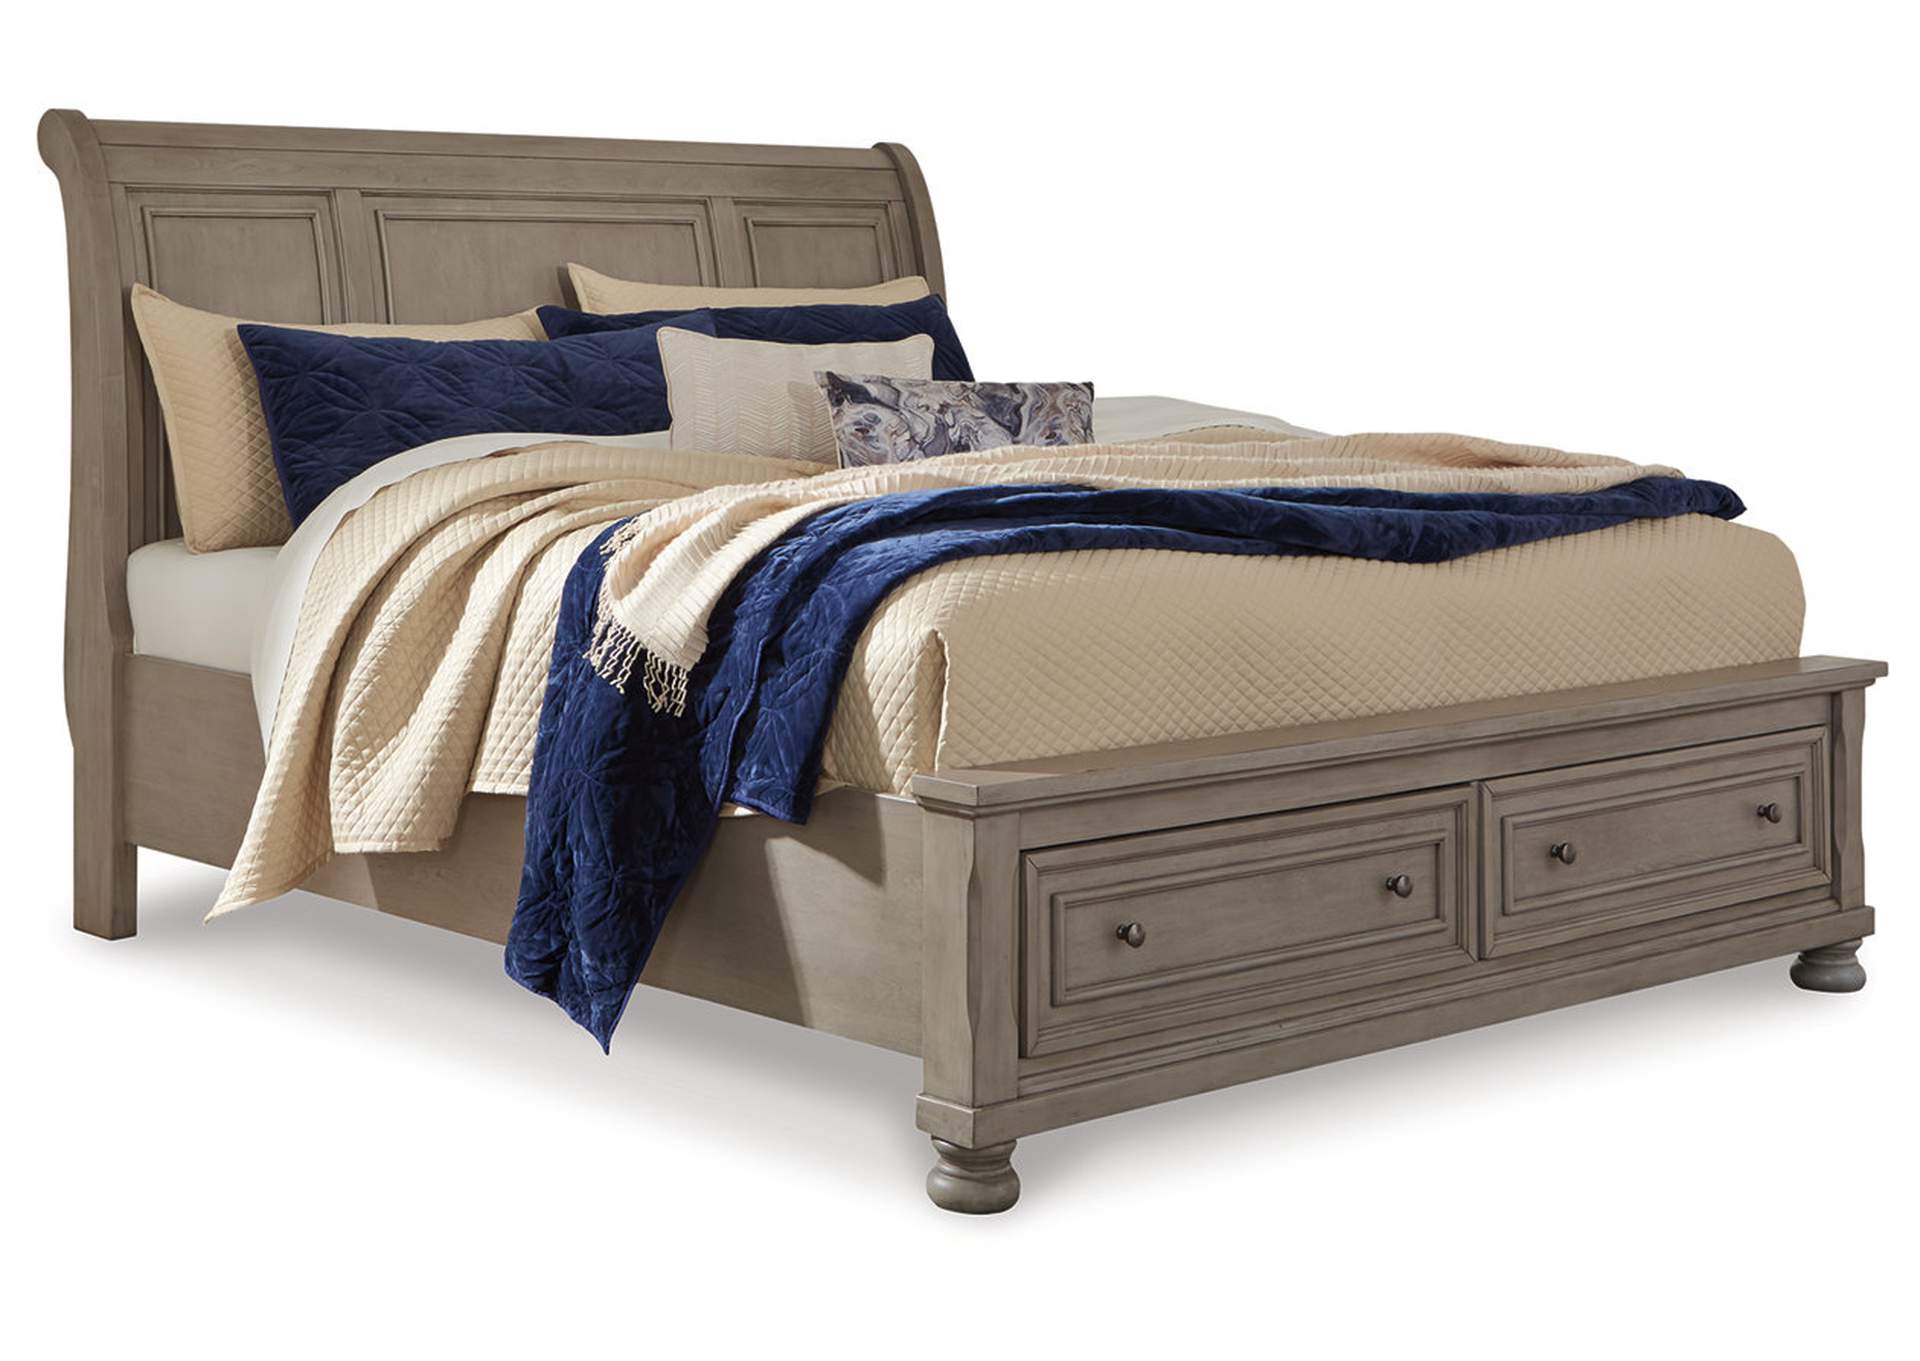 Lettner California King Sleigh Bed,Signature Design By Ashley